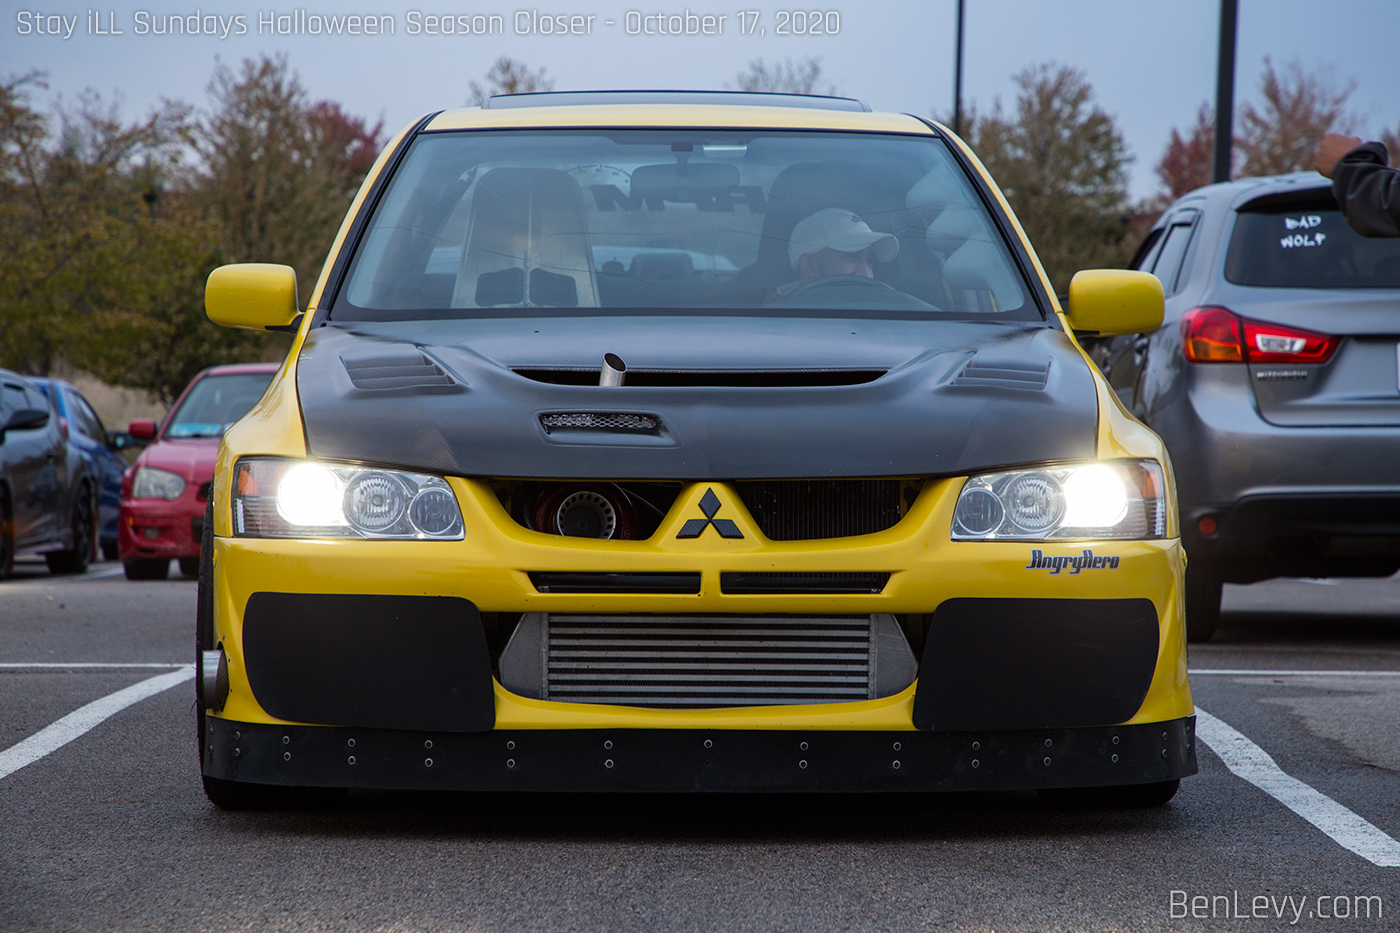 Yellow Lancer Evolution with Angry Aero Bumper Shutters